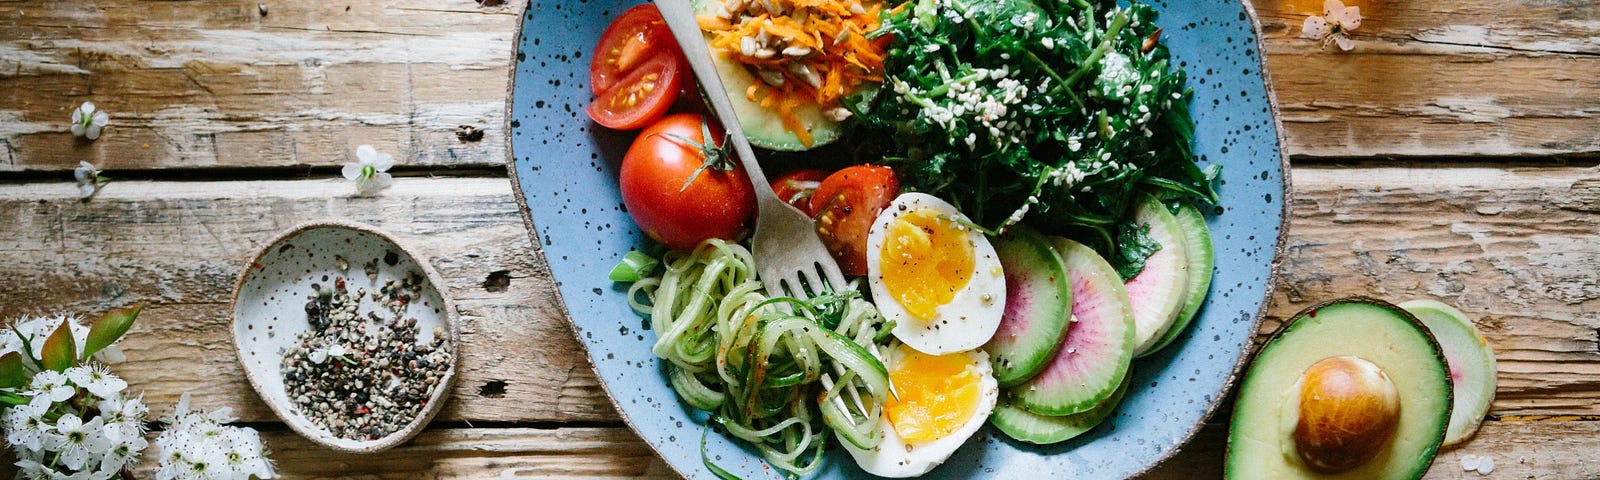 Photo of a Mediterranean style meal of greens, green whole grain pasta, sliced boiled eggs,  avocado, carrots and tomatoes on a blue plate. Glass of red wine on the side.